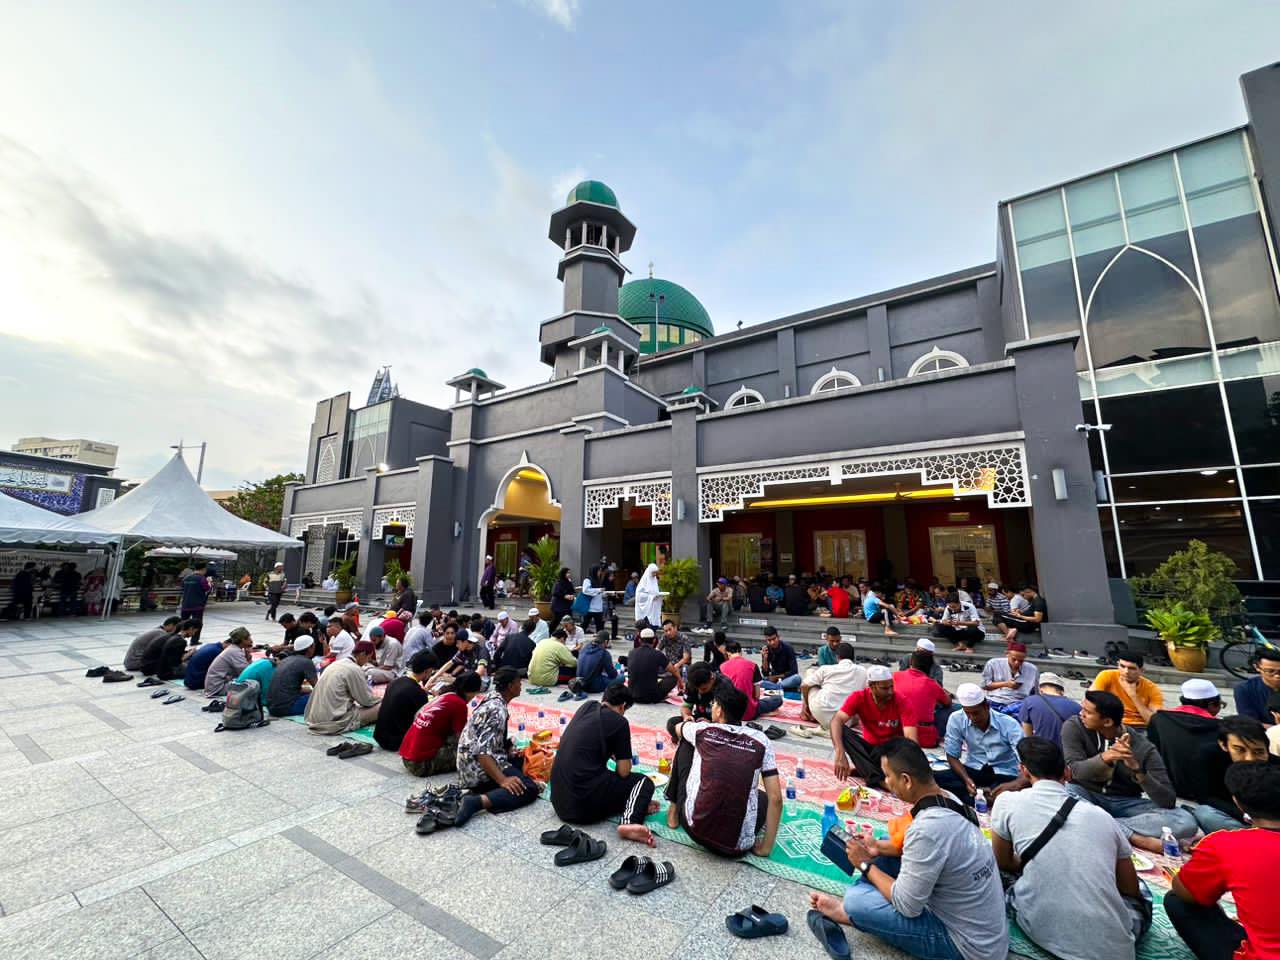 Masjid Jamek Kampung Baru - Mosque goers waiting to break their fast in front of the mosque